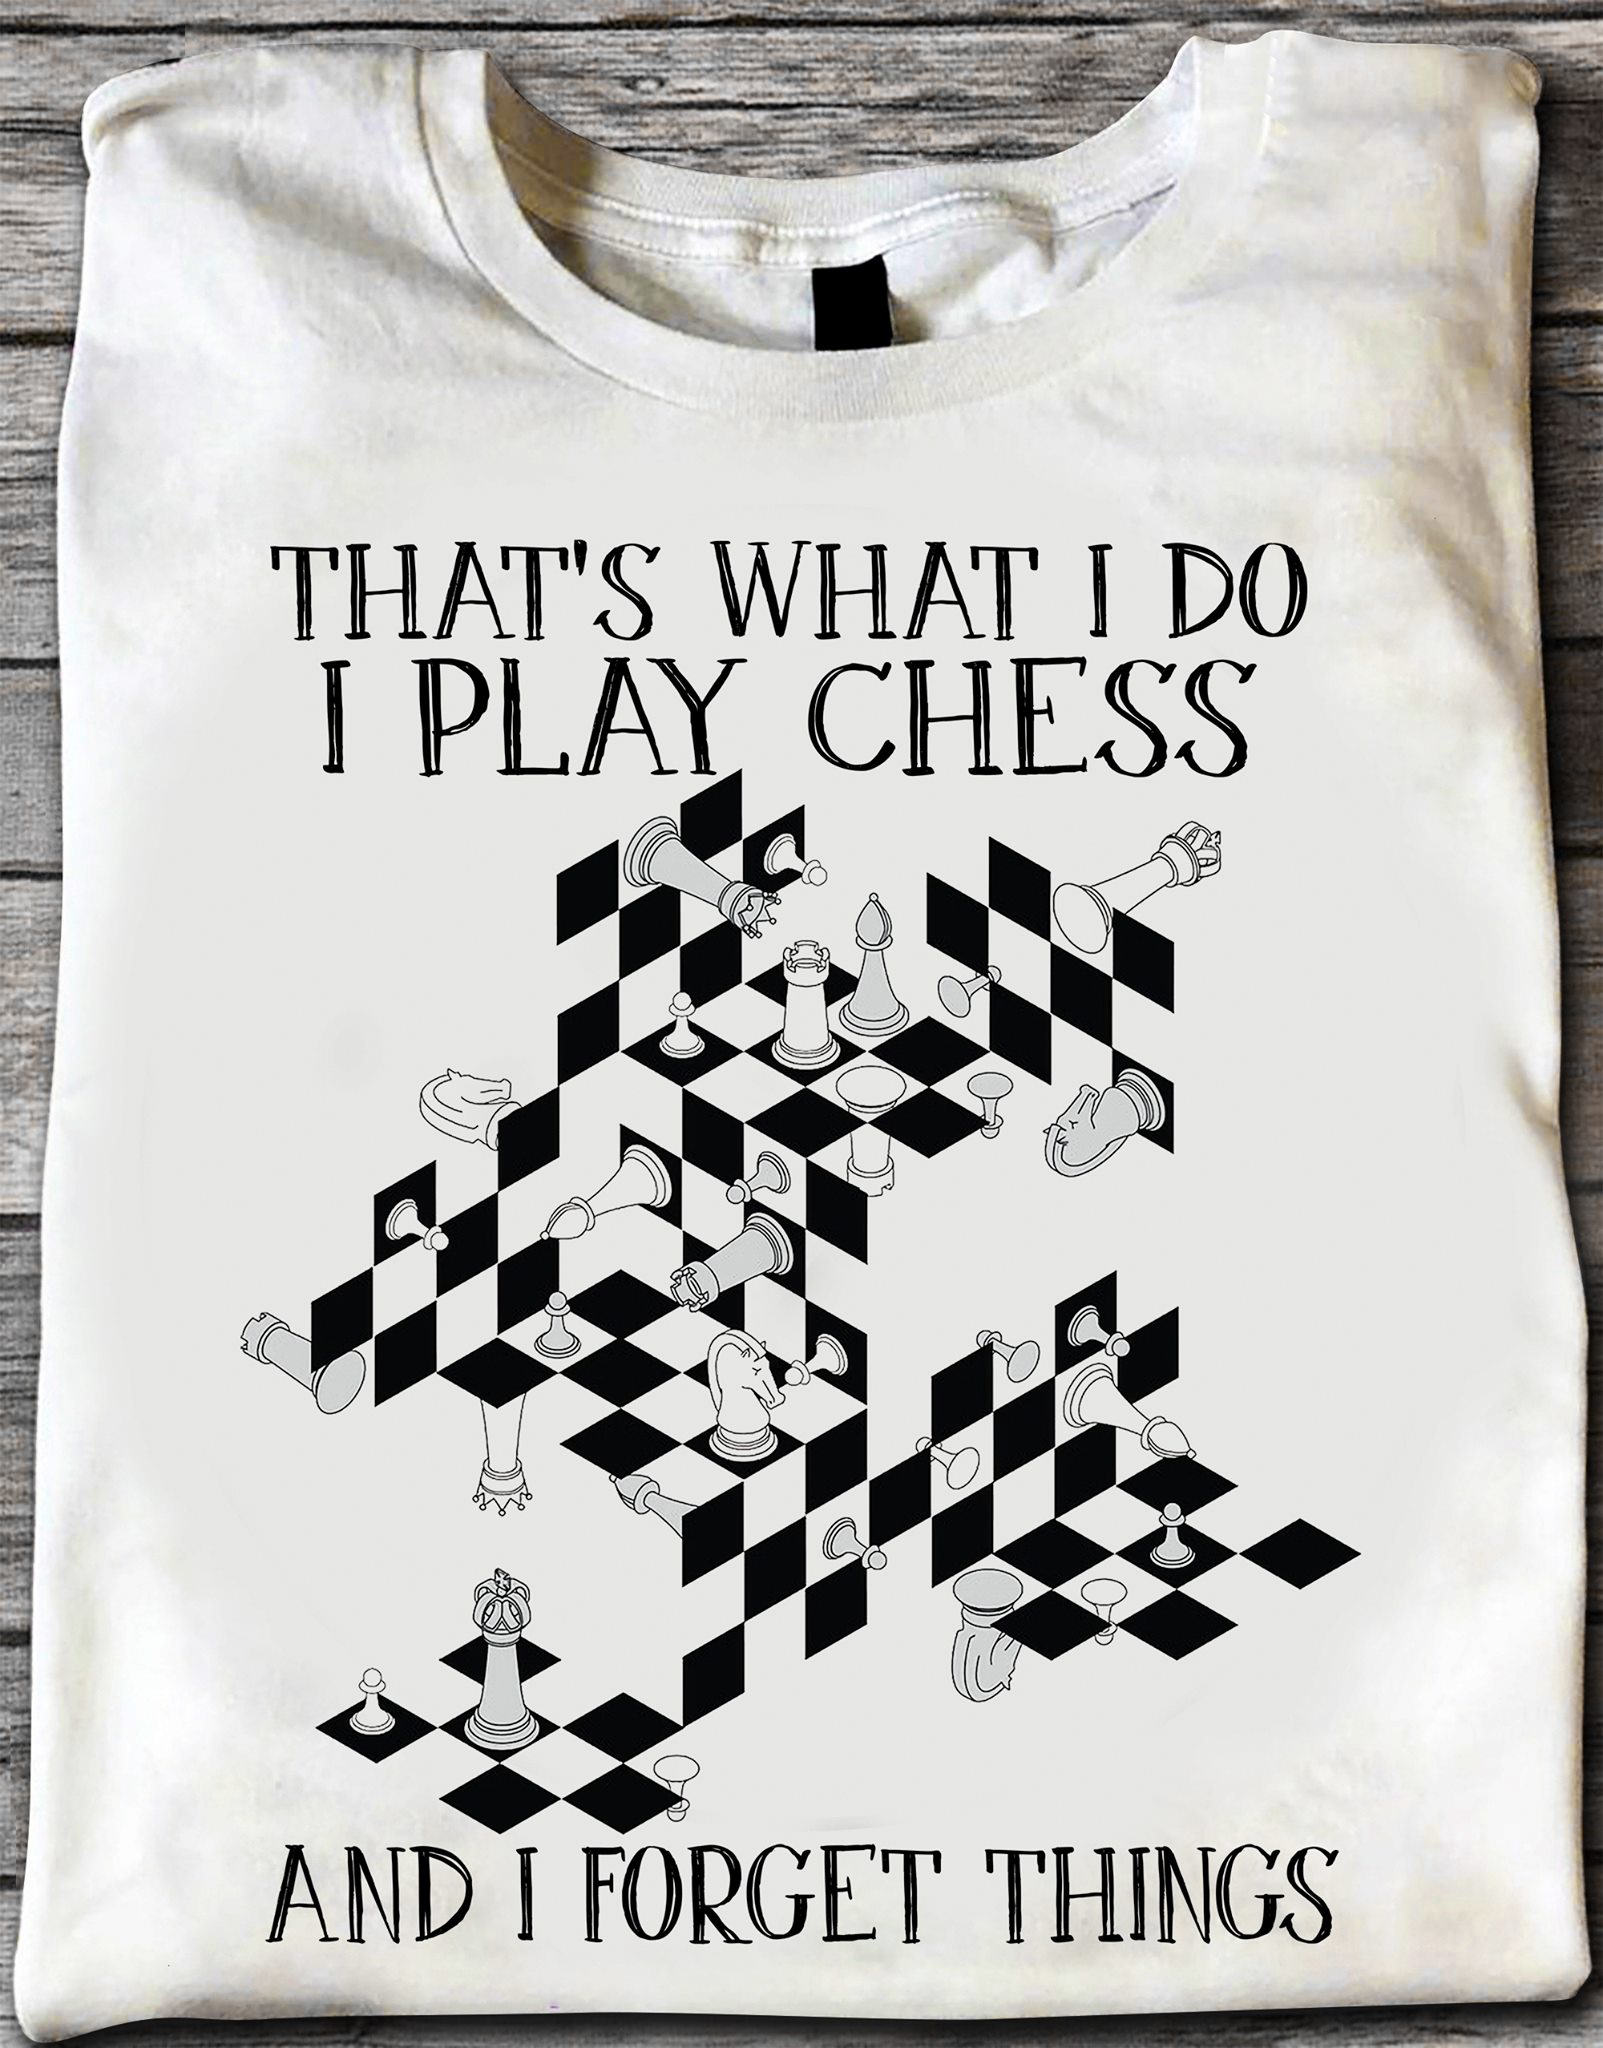 That's what I do I play chess and I forget things - Love playing chess